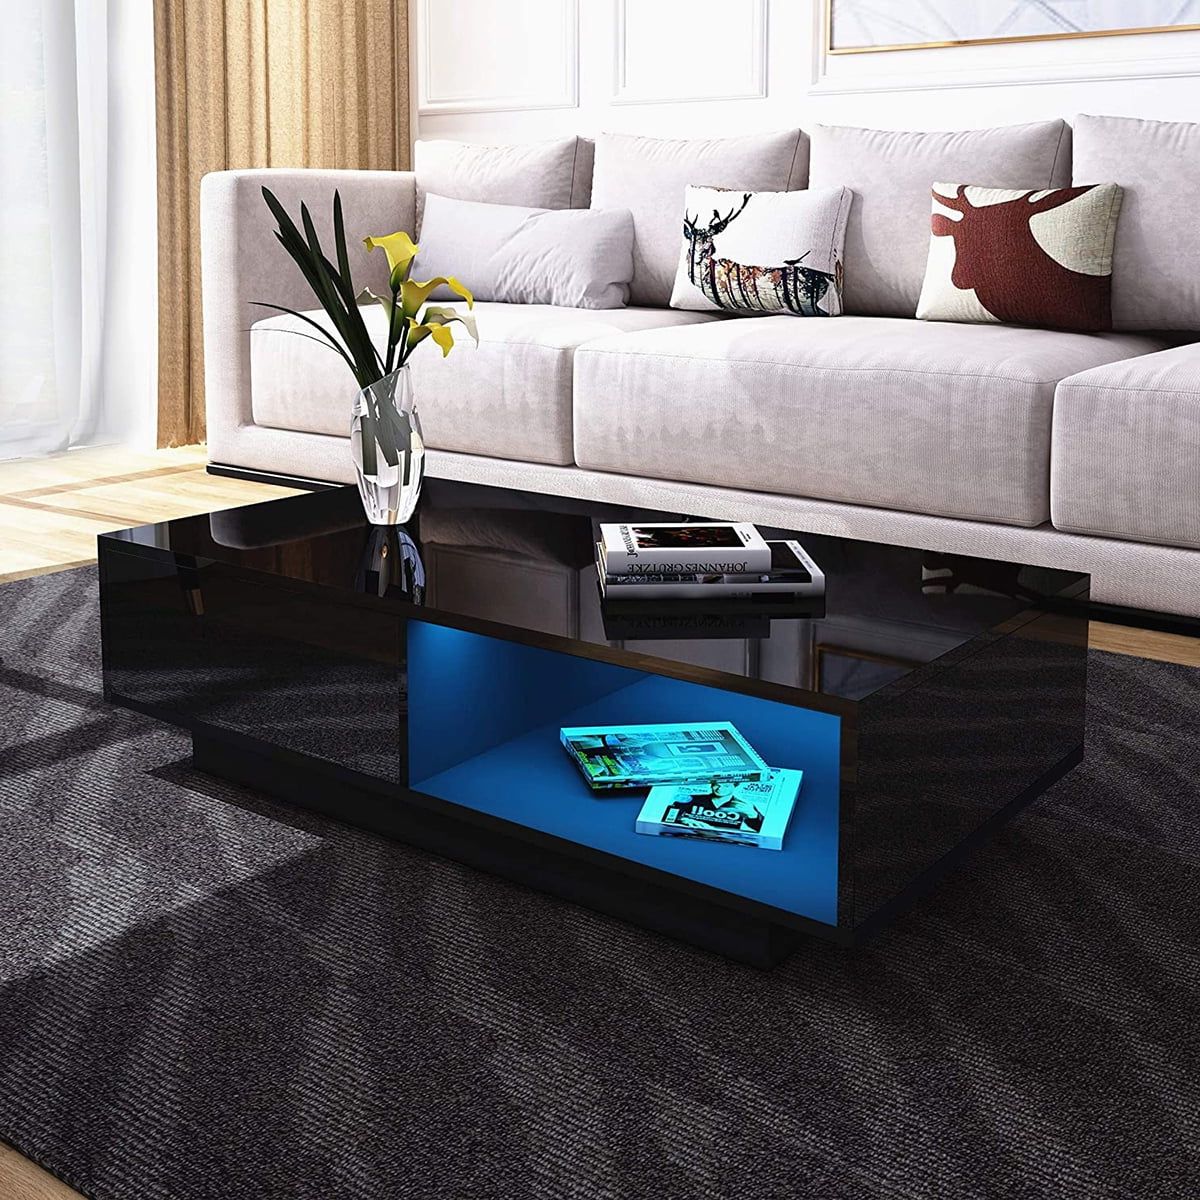 Modern High Gloss Coffee Table With Drawers, Led Sofa Side End Desk Pertaining To Current Coffee Tables With Drawers And Led Lights (View 9 of 15)